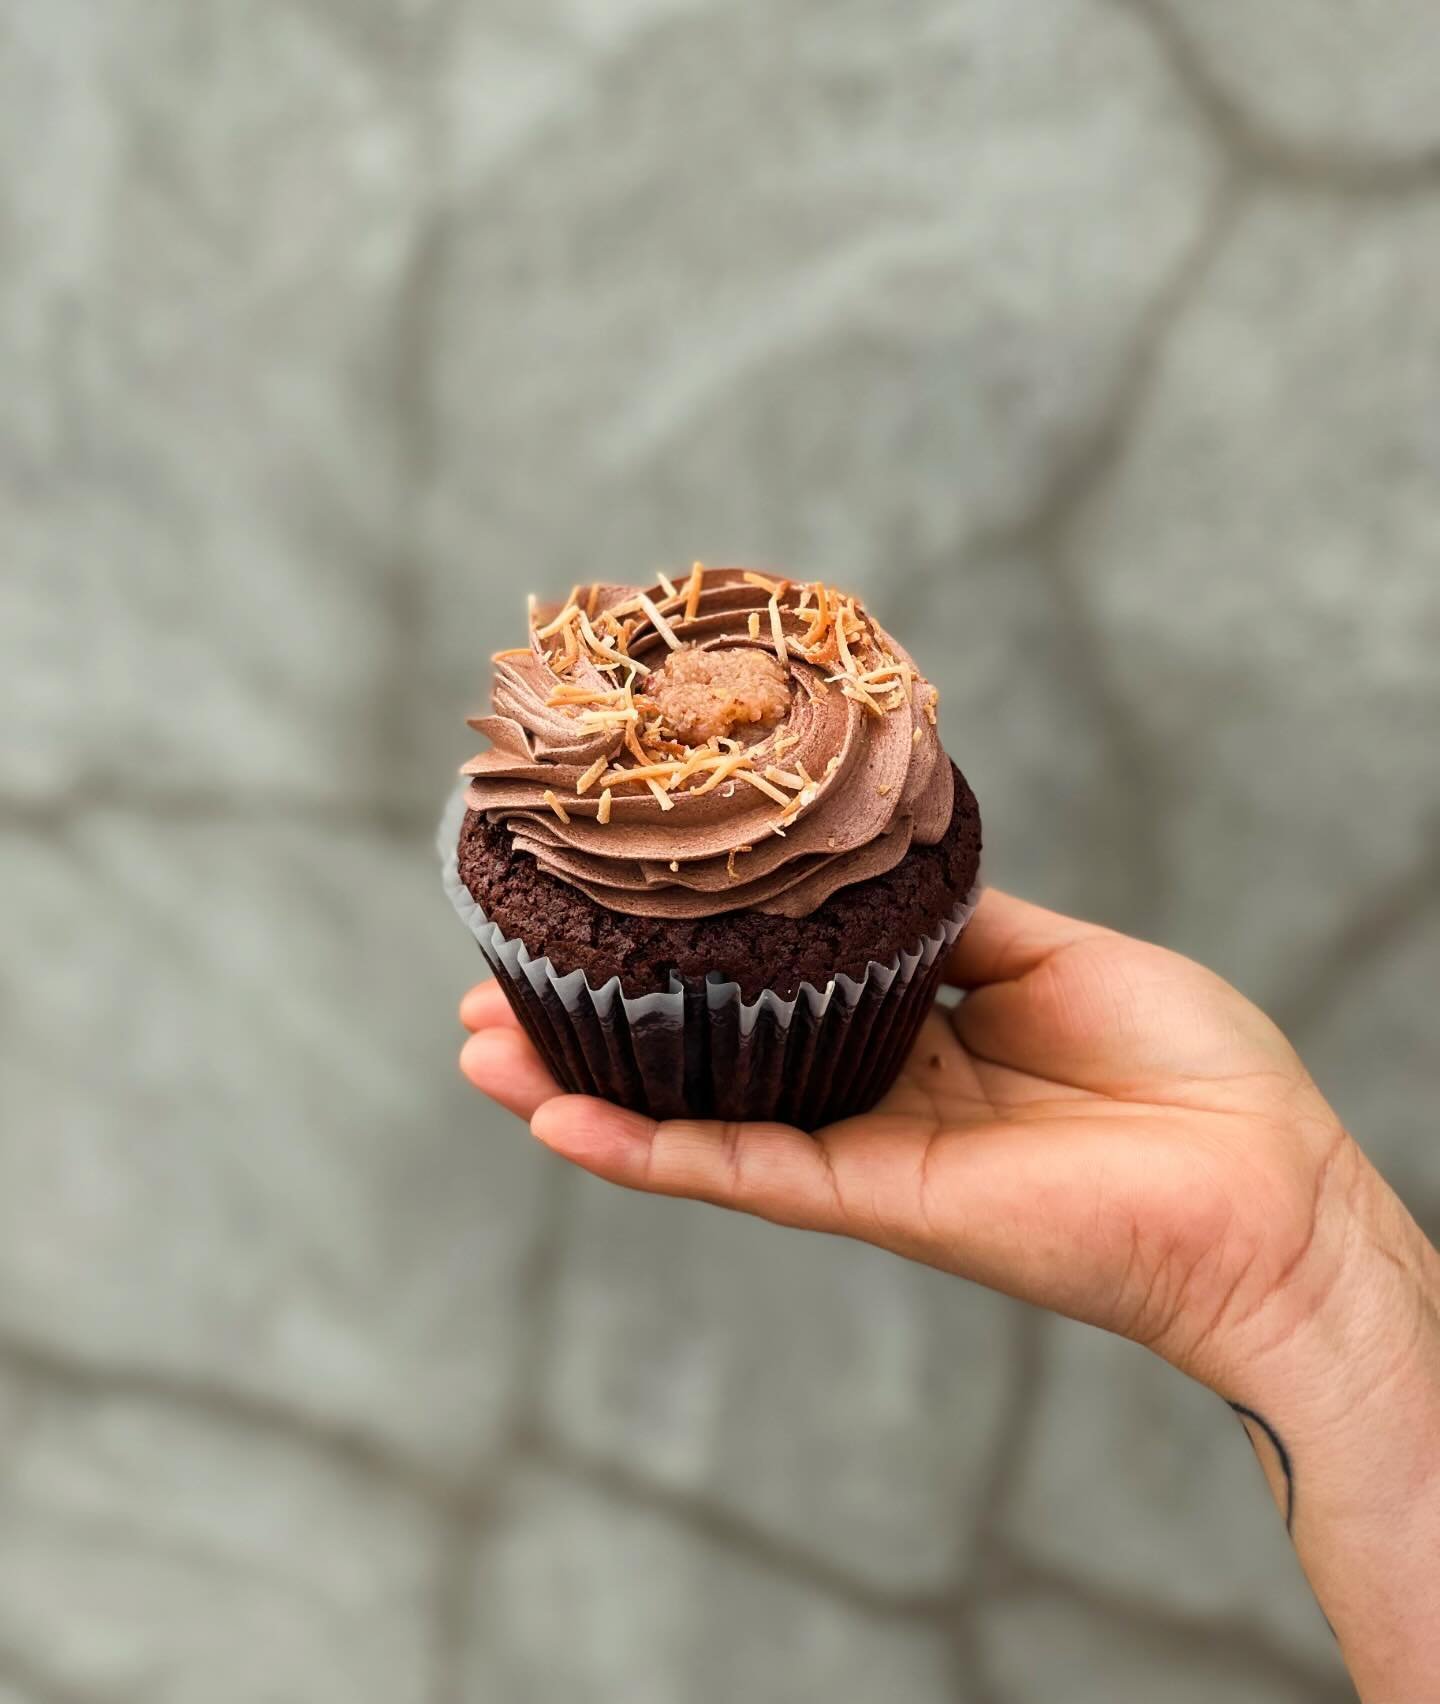 German Chocolate Cupcakes are back! Moist dark chocolate cake filled with a coconut-pecan custard and topped with a chocolate buttercream. 

#chocolate #chocolatelover #chocolatecake #chocolovers #chocoholic #germanchocolatecake #coconut #coconutlove